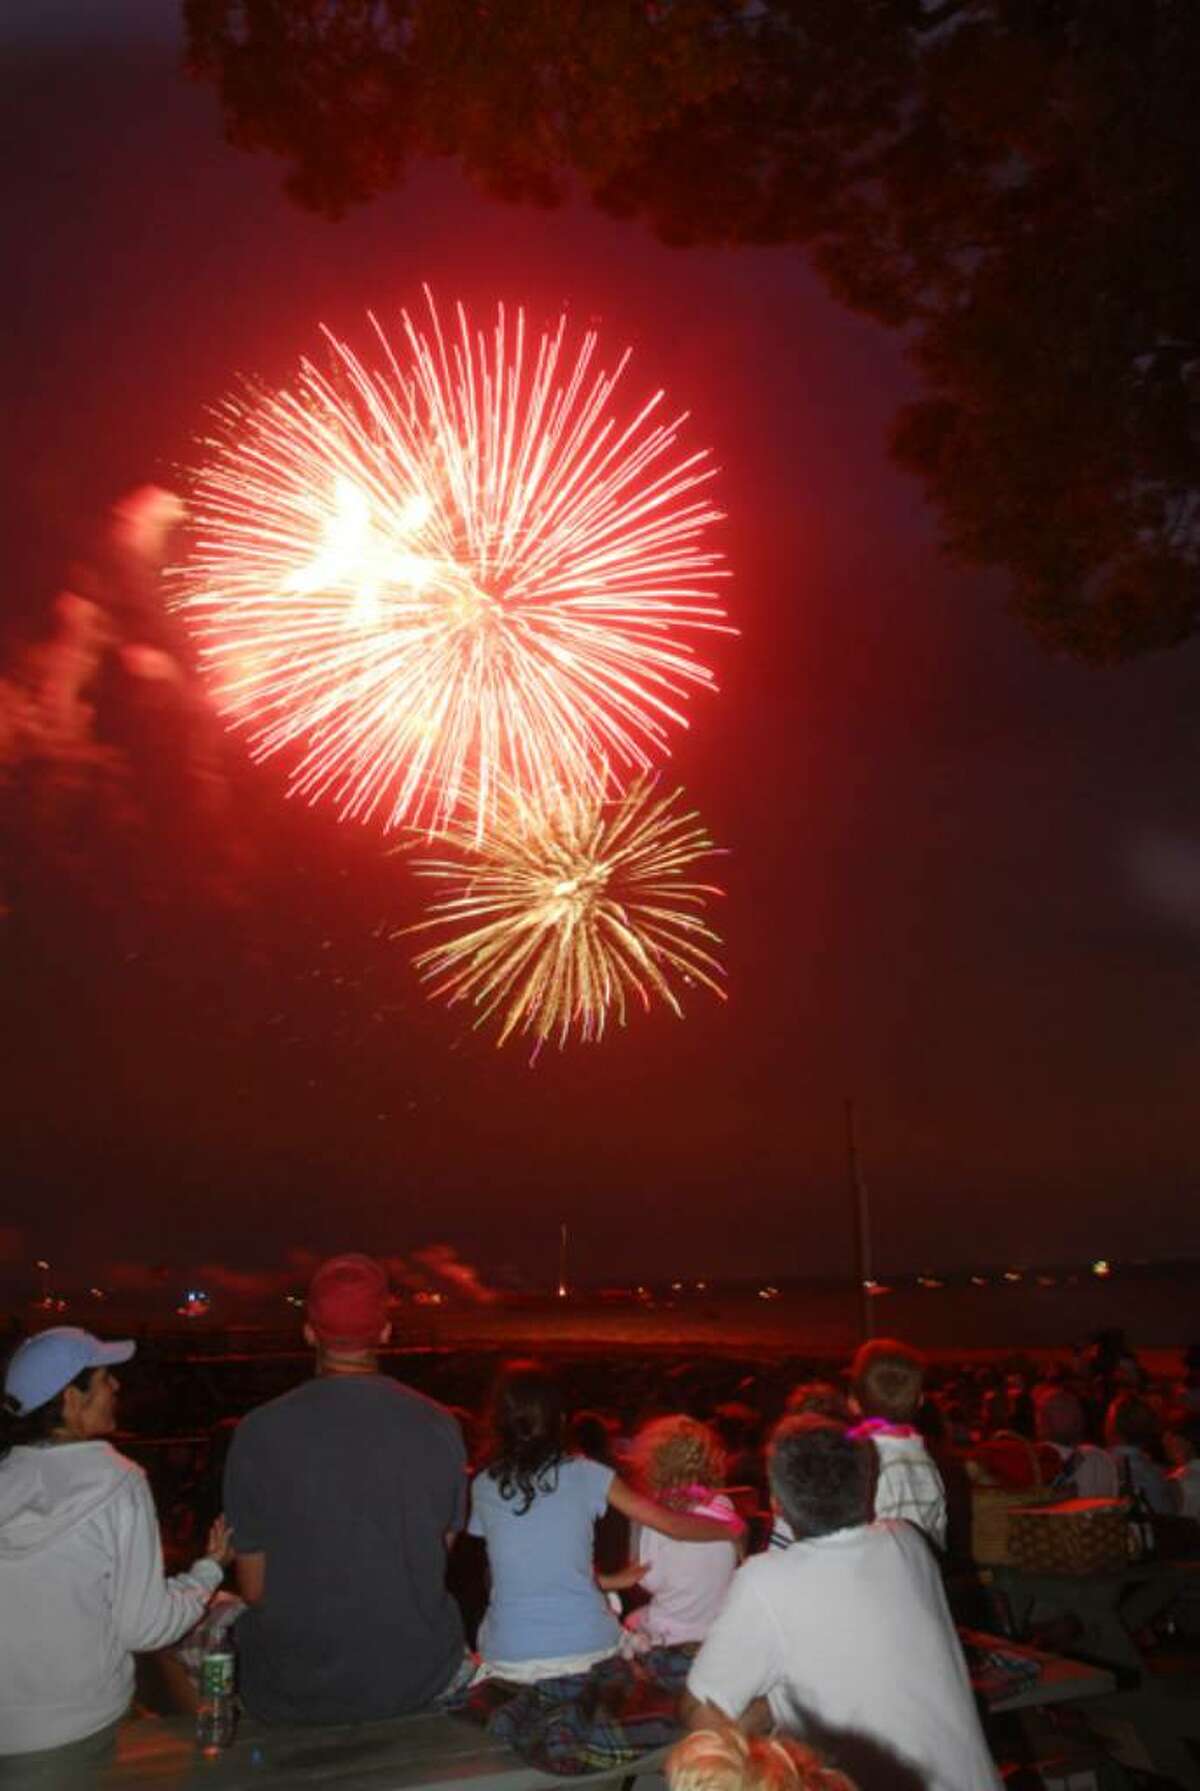 Fireworks shows around the area